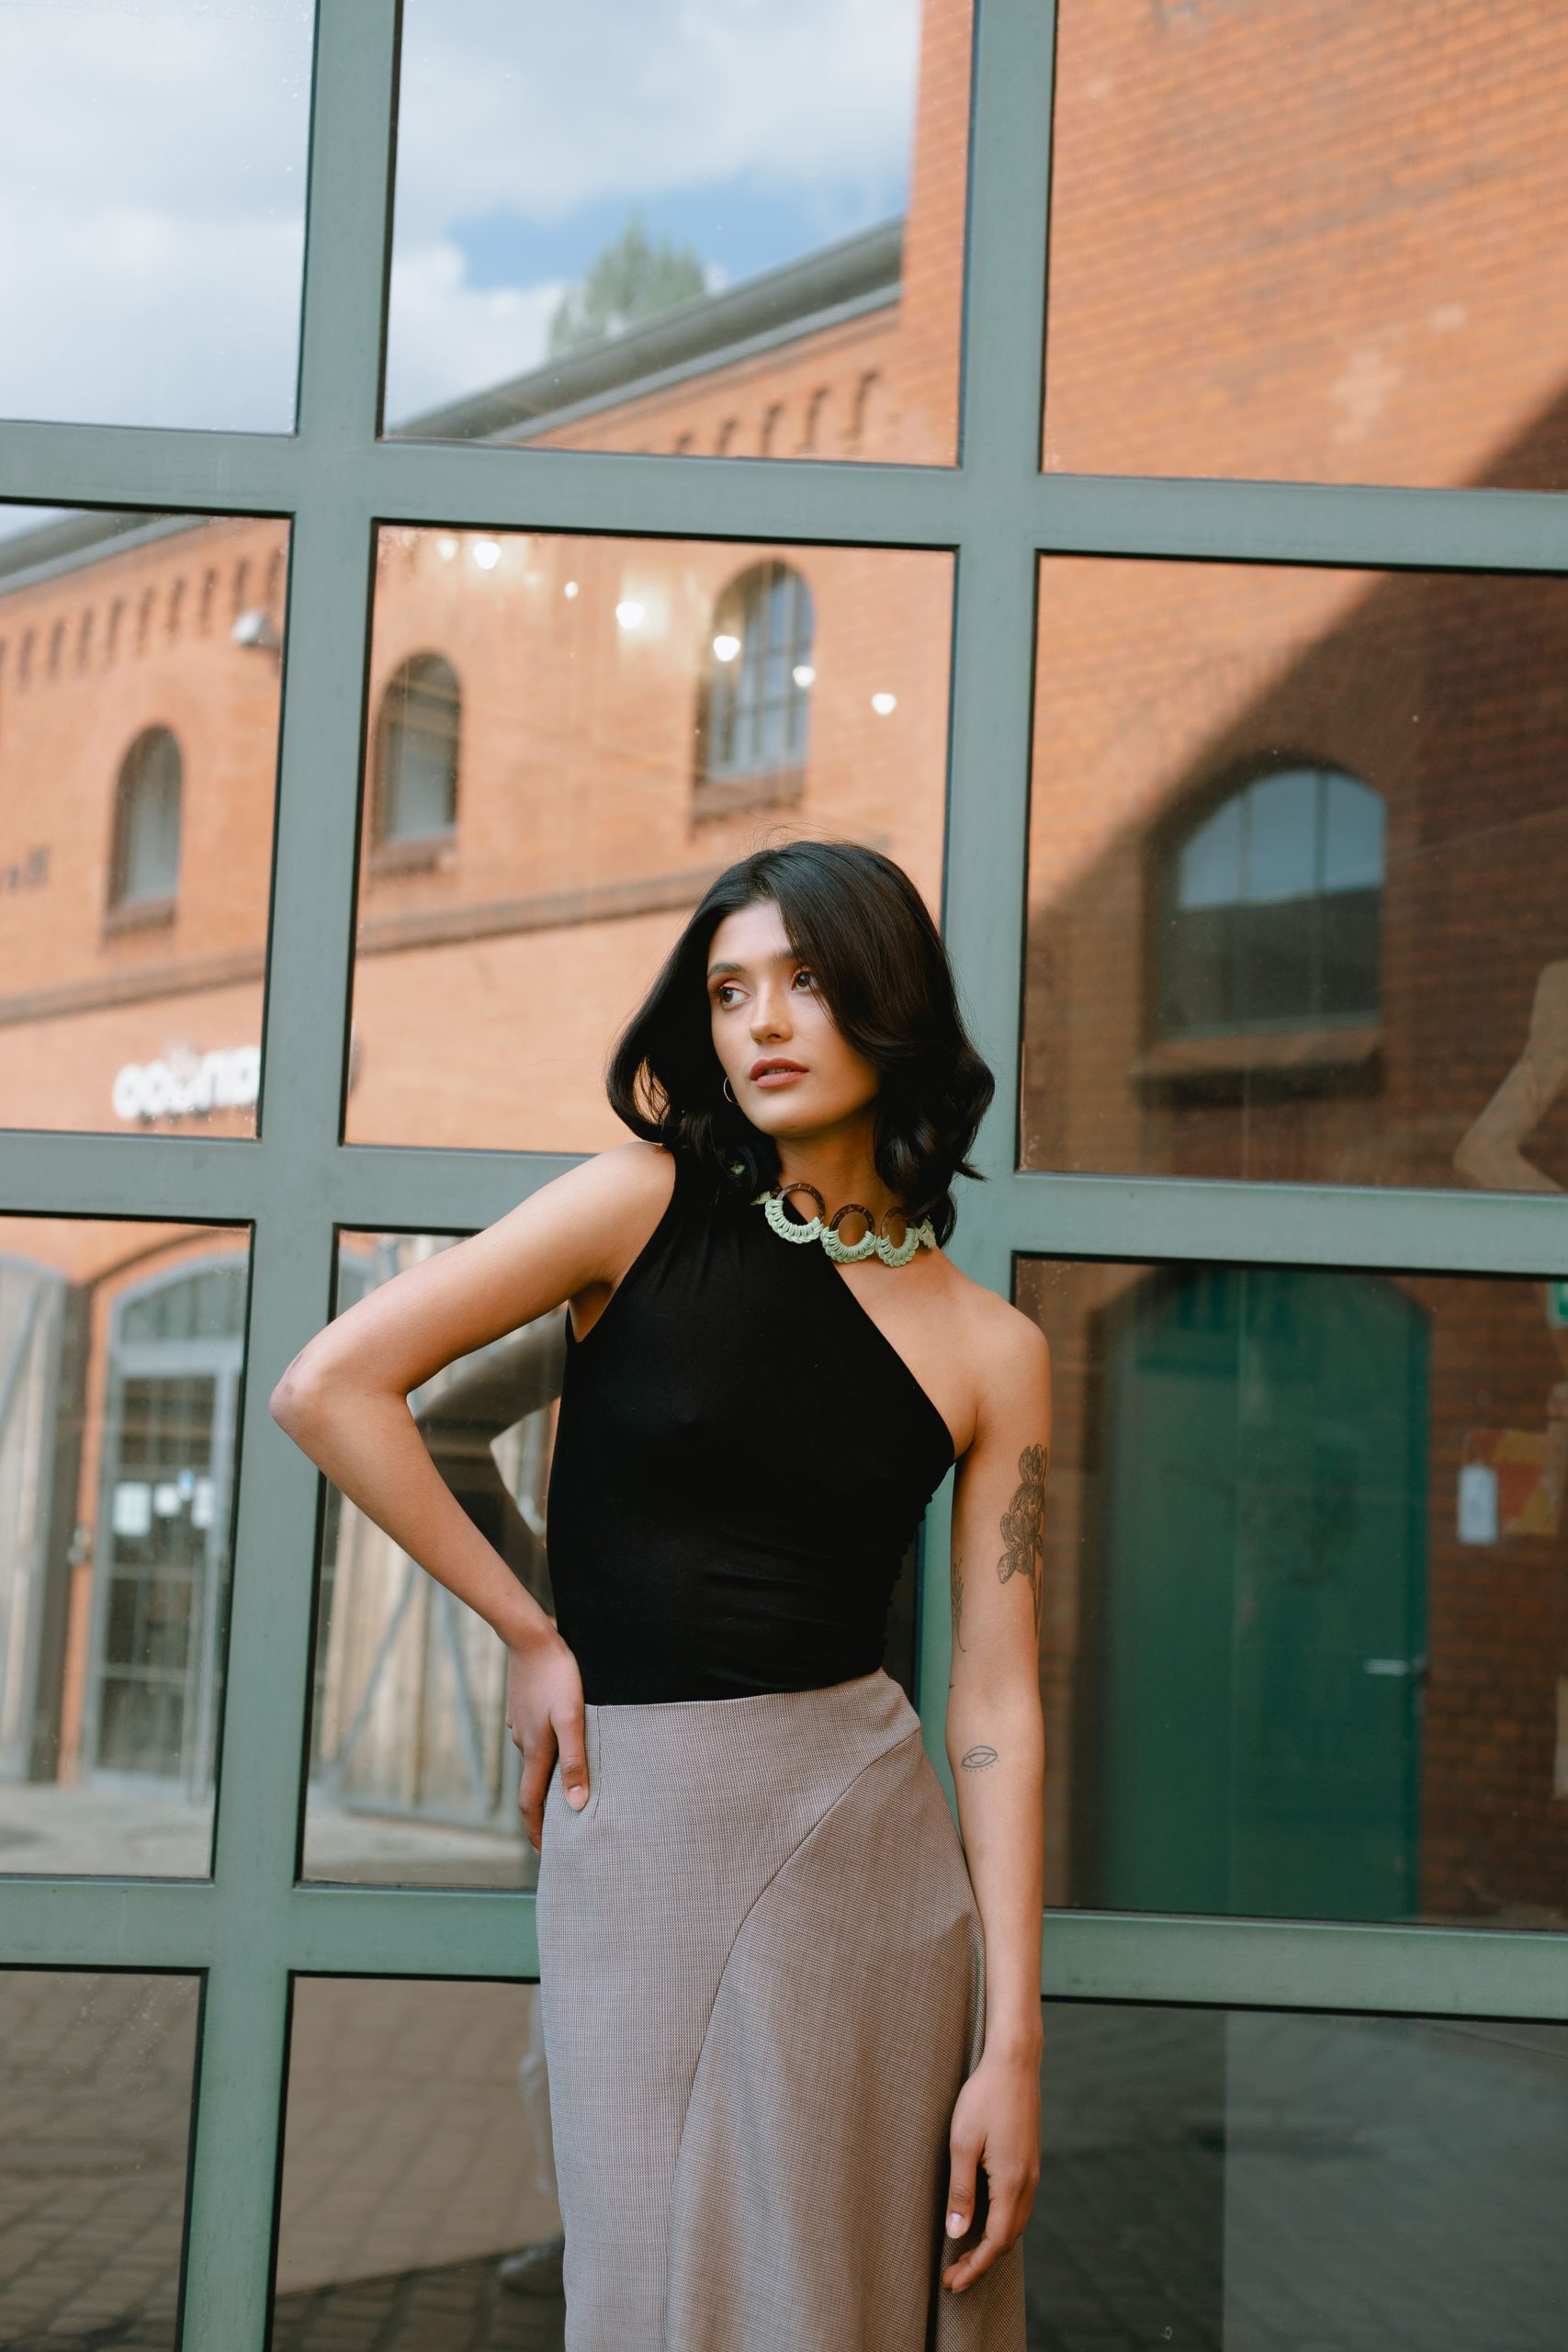 Woman wearing the Cara Top sewing pattern from JULIANA MARTEJEVS on The Fold Line. A knit top pattern made in cotton jersey fabrics, featuring an asymmetric style with cold shoulder, close fitting and sleeveless.